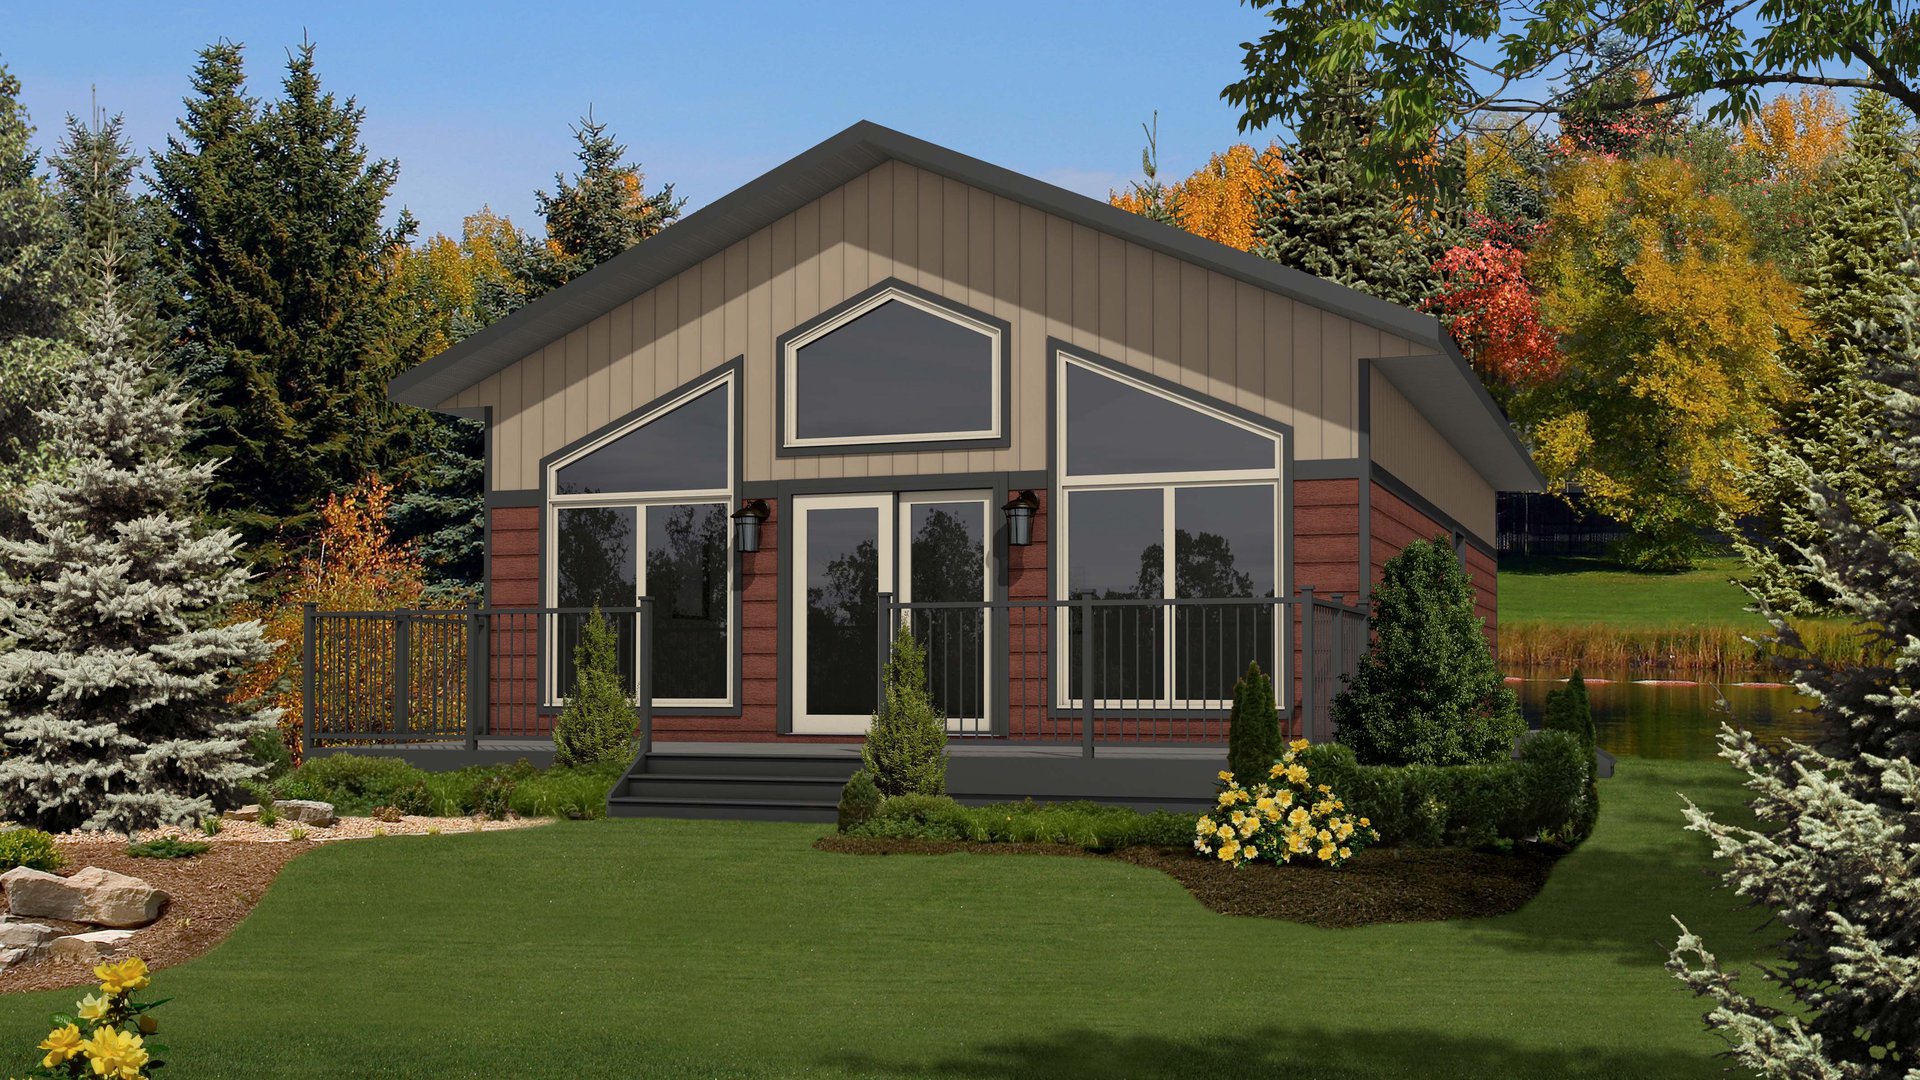 Sylvan house plan modular homes nelson homes ready to move homes prefabricated home packages.jpg